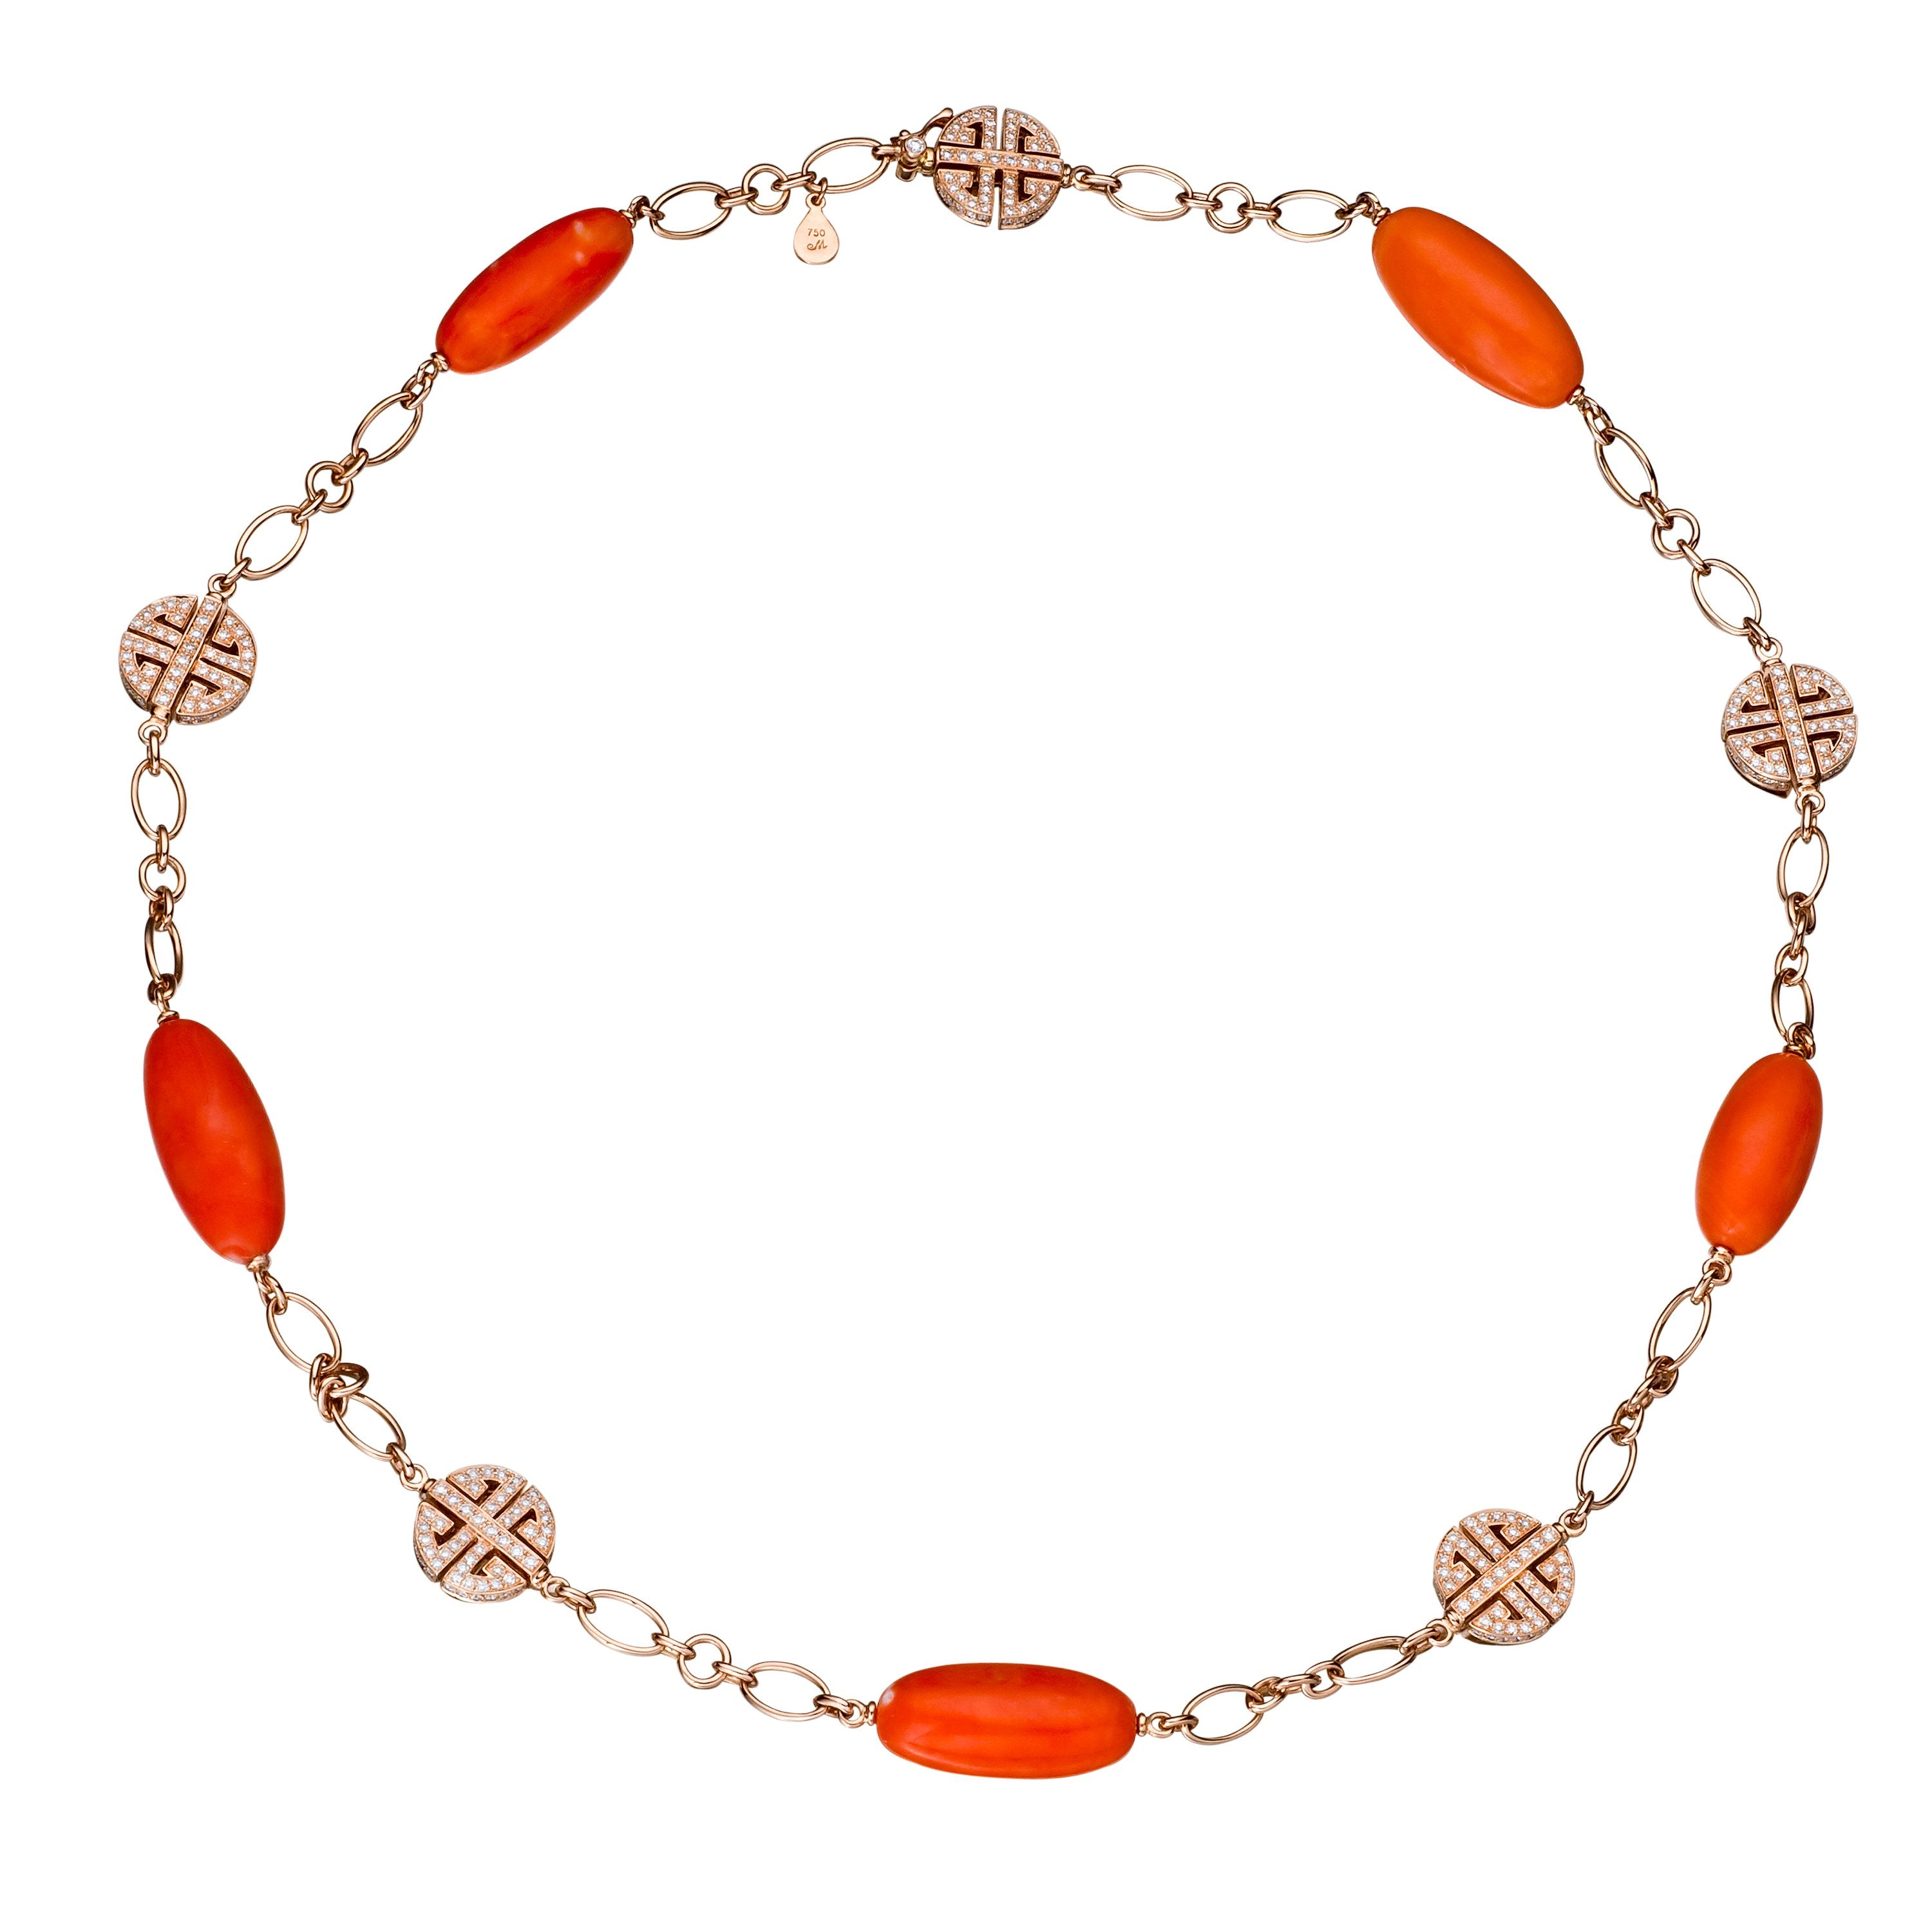 Coral and diamond emblem gold necklace, crafted in 18 karat rose gold.